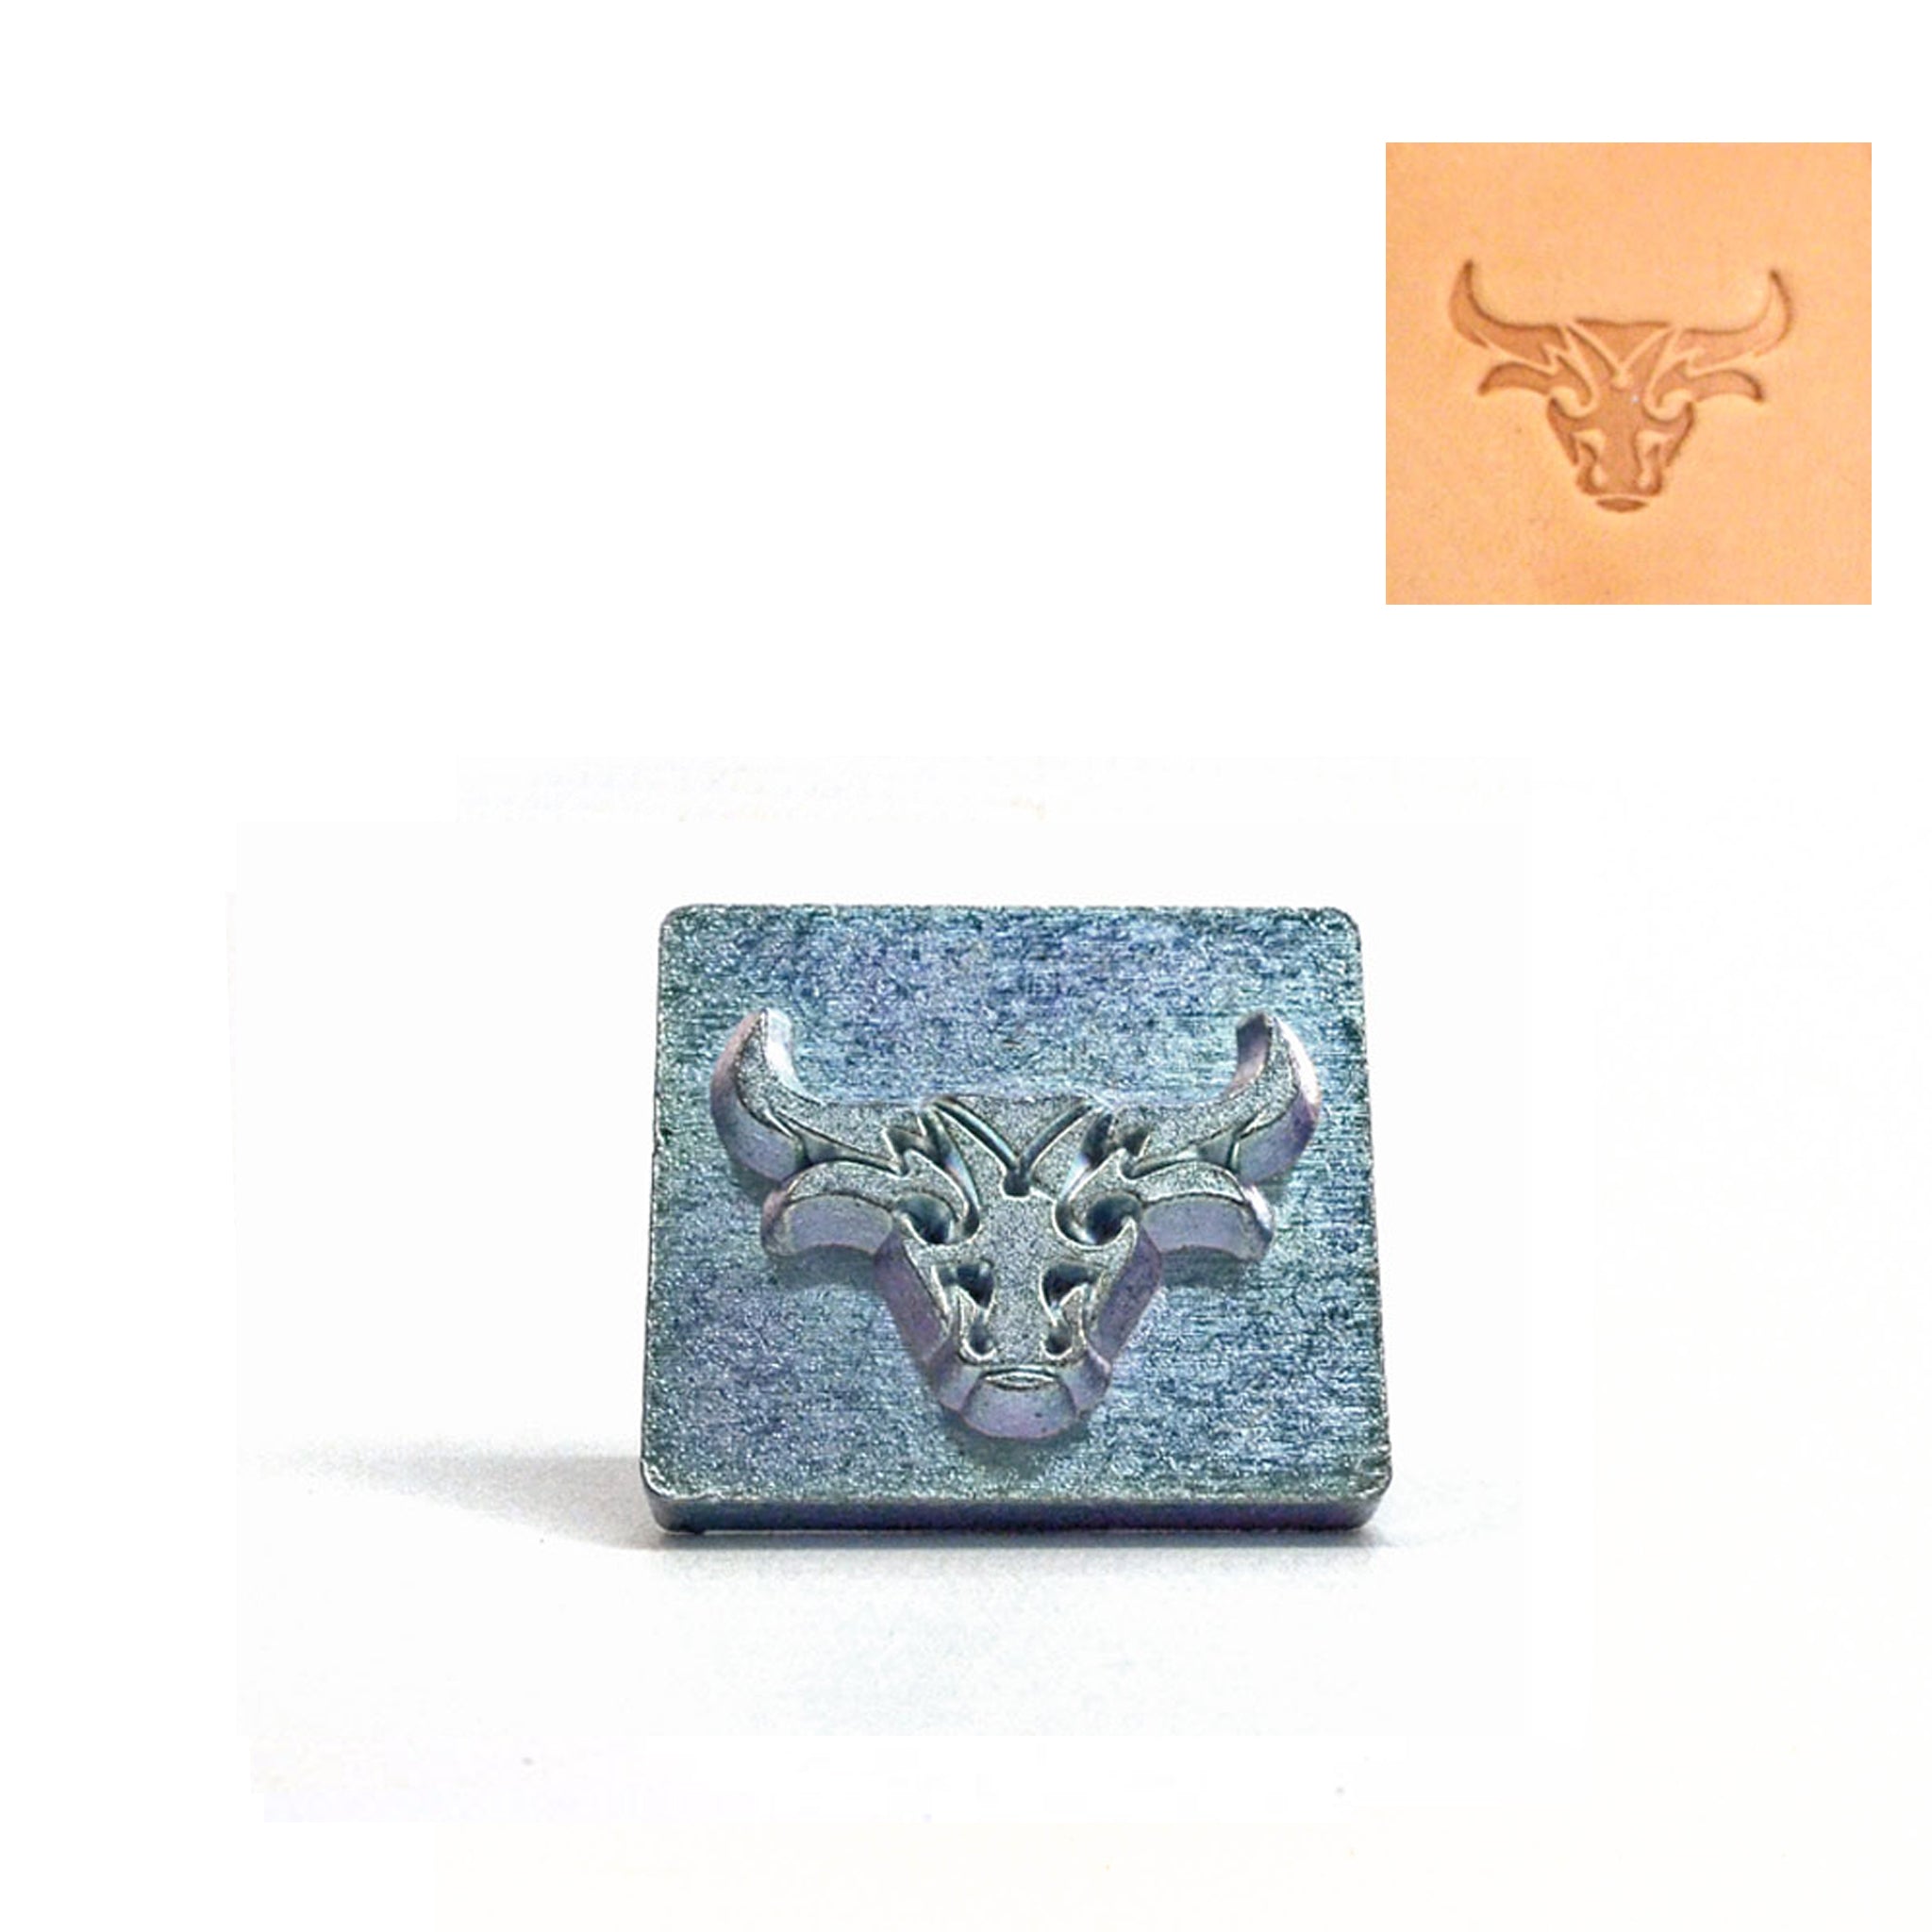 Tribal Bull 3D Embossing Stamp from Identity Leathercraft